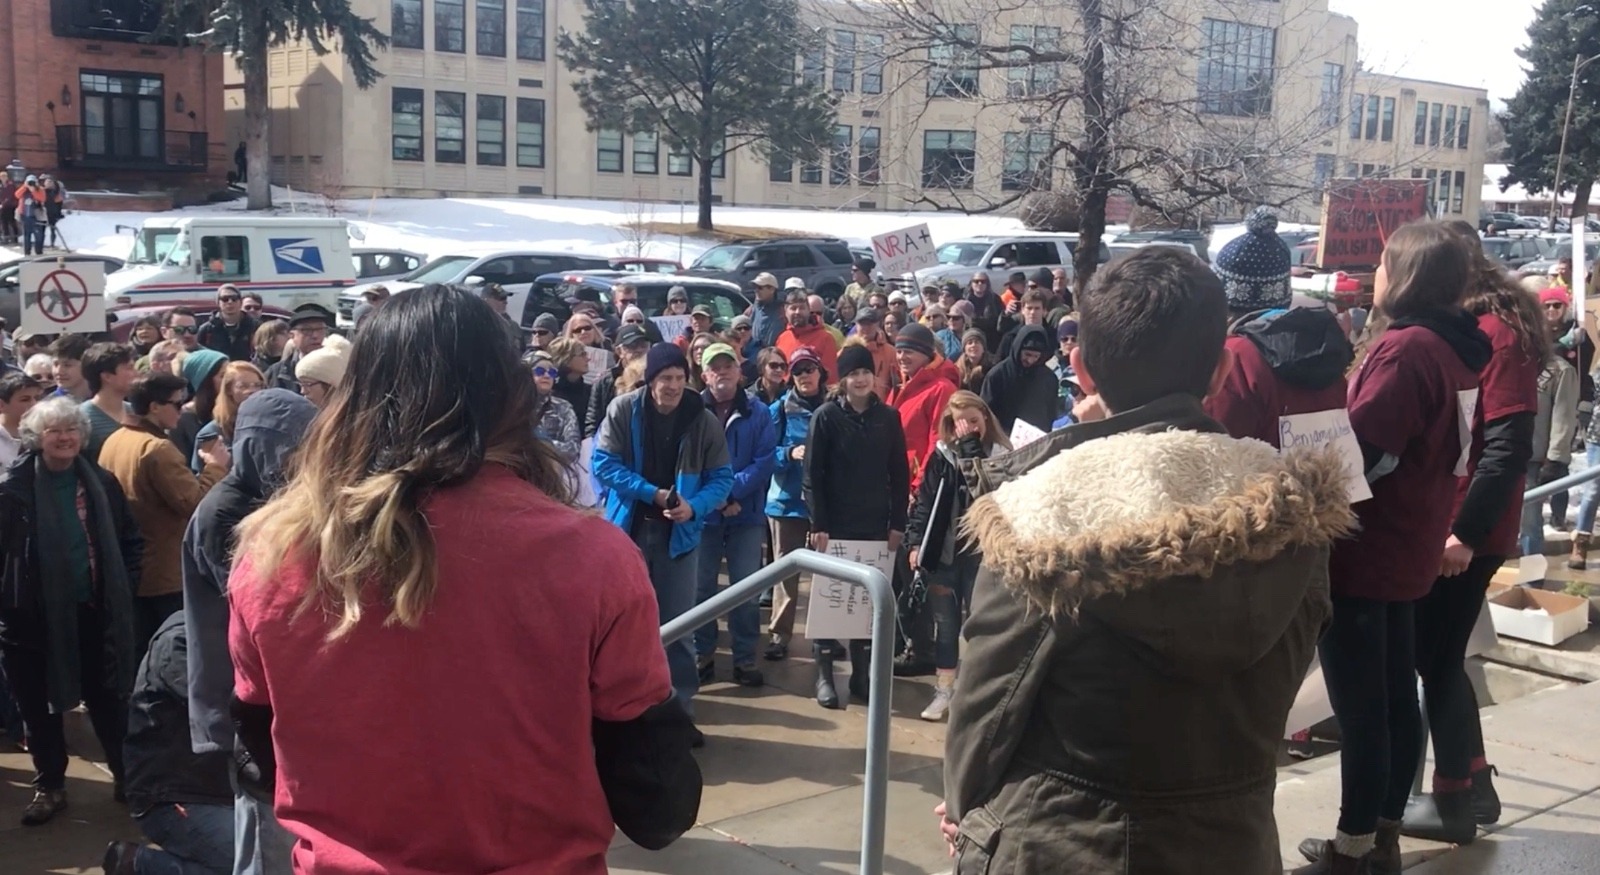 A large crowd gathered in the recent Bozeman version of March For Our Lives, which Tate says was a positive social response to prevent gun violence. He praises the young people who organized the event and who are leading the discussion nationwide. 